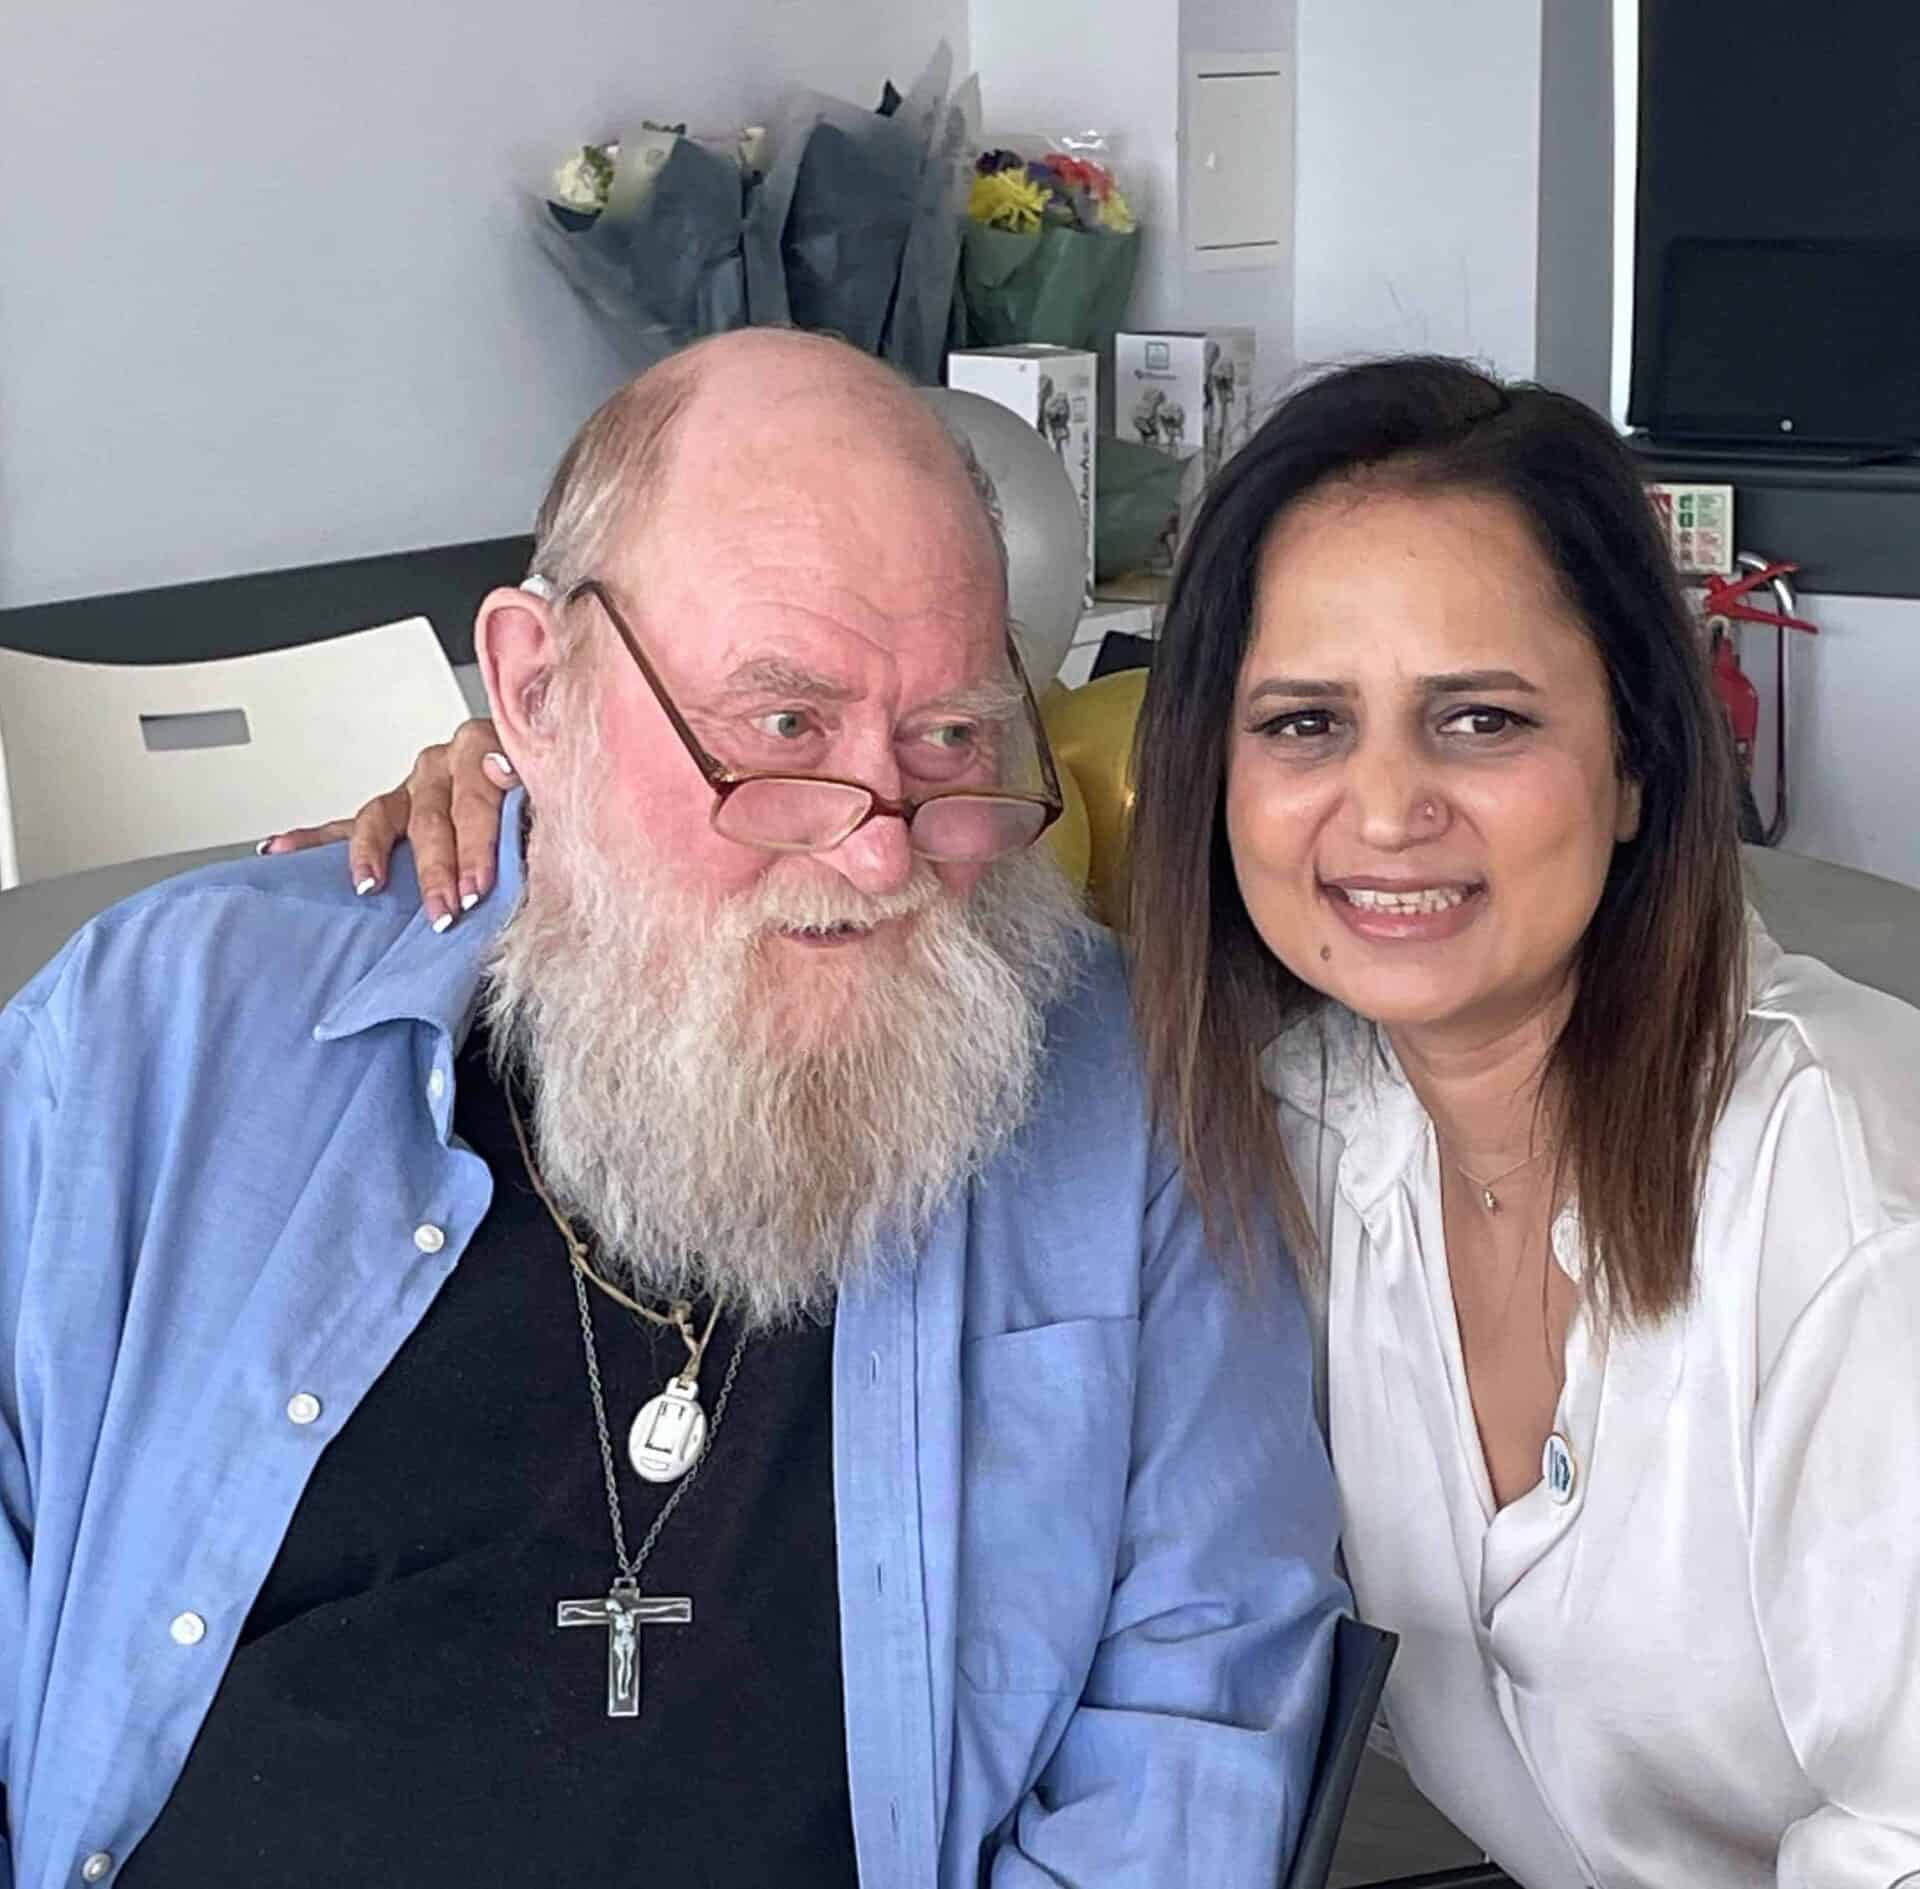 Two smiling individuals posing together for a photo, with one person sporting a long white beard and glasses, and the other with shoulder-length hair. The caregiver and their companion stand in front of a homely